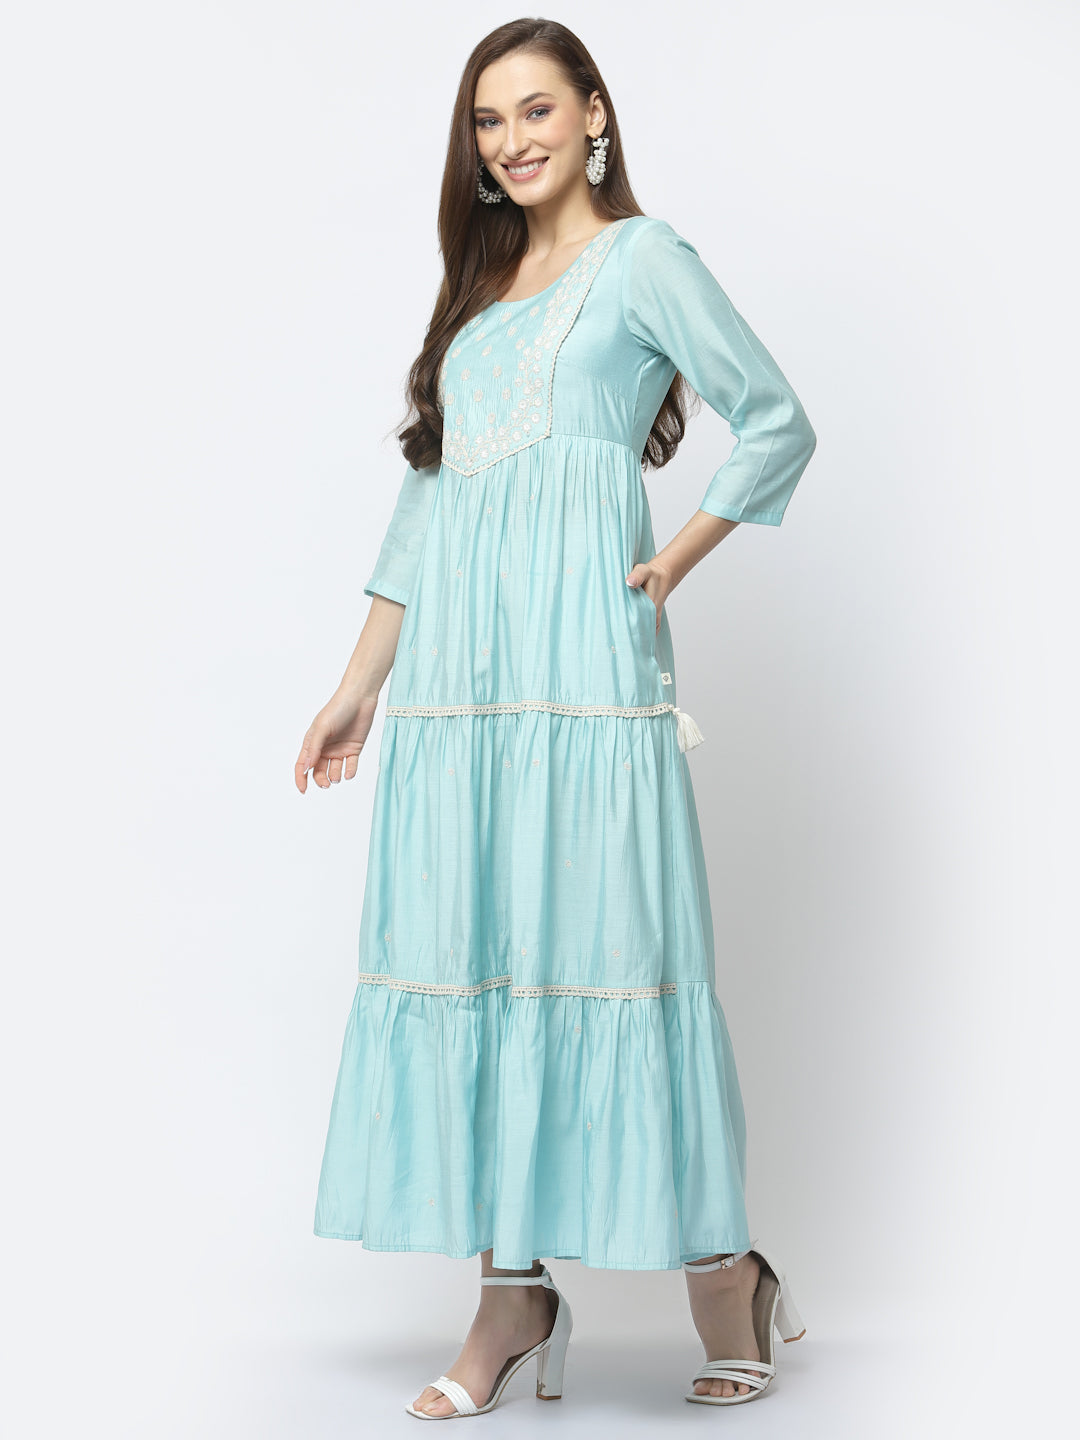 Pale Blue Lily Maxi Dress with All Over Embroidery and Lace Detailing, Side Pockets - ARH1480